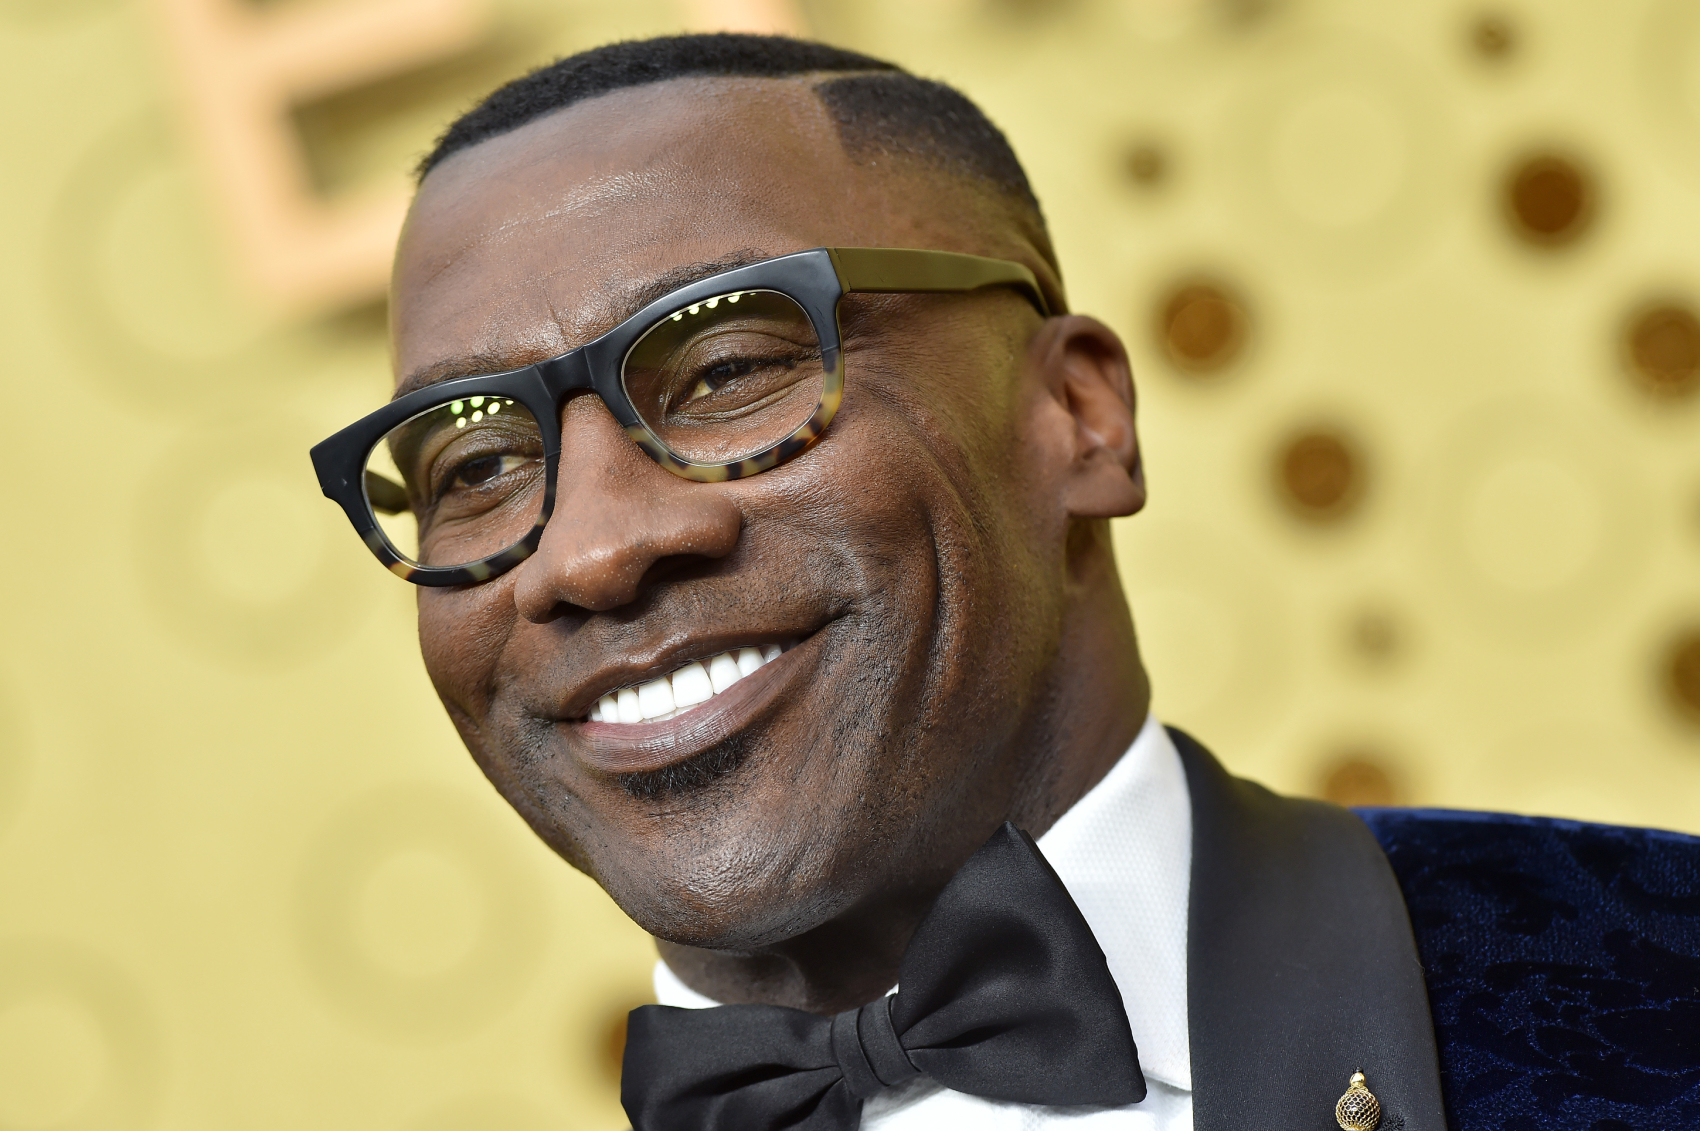 President Donald Trump has been very critical of people kneeling during the national anthem, so Shannon Sharpe just sent him a stern message.